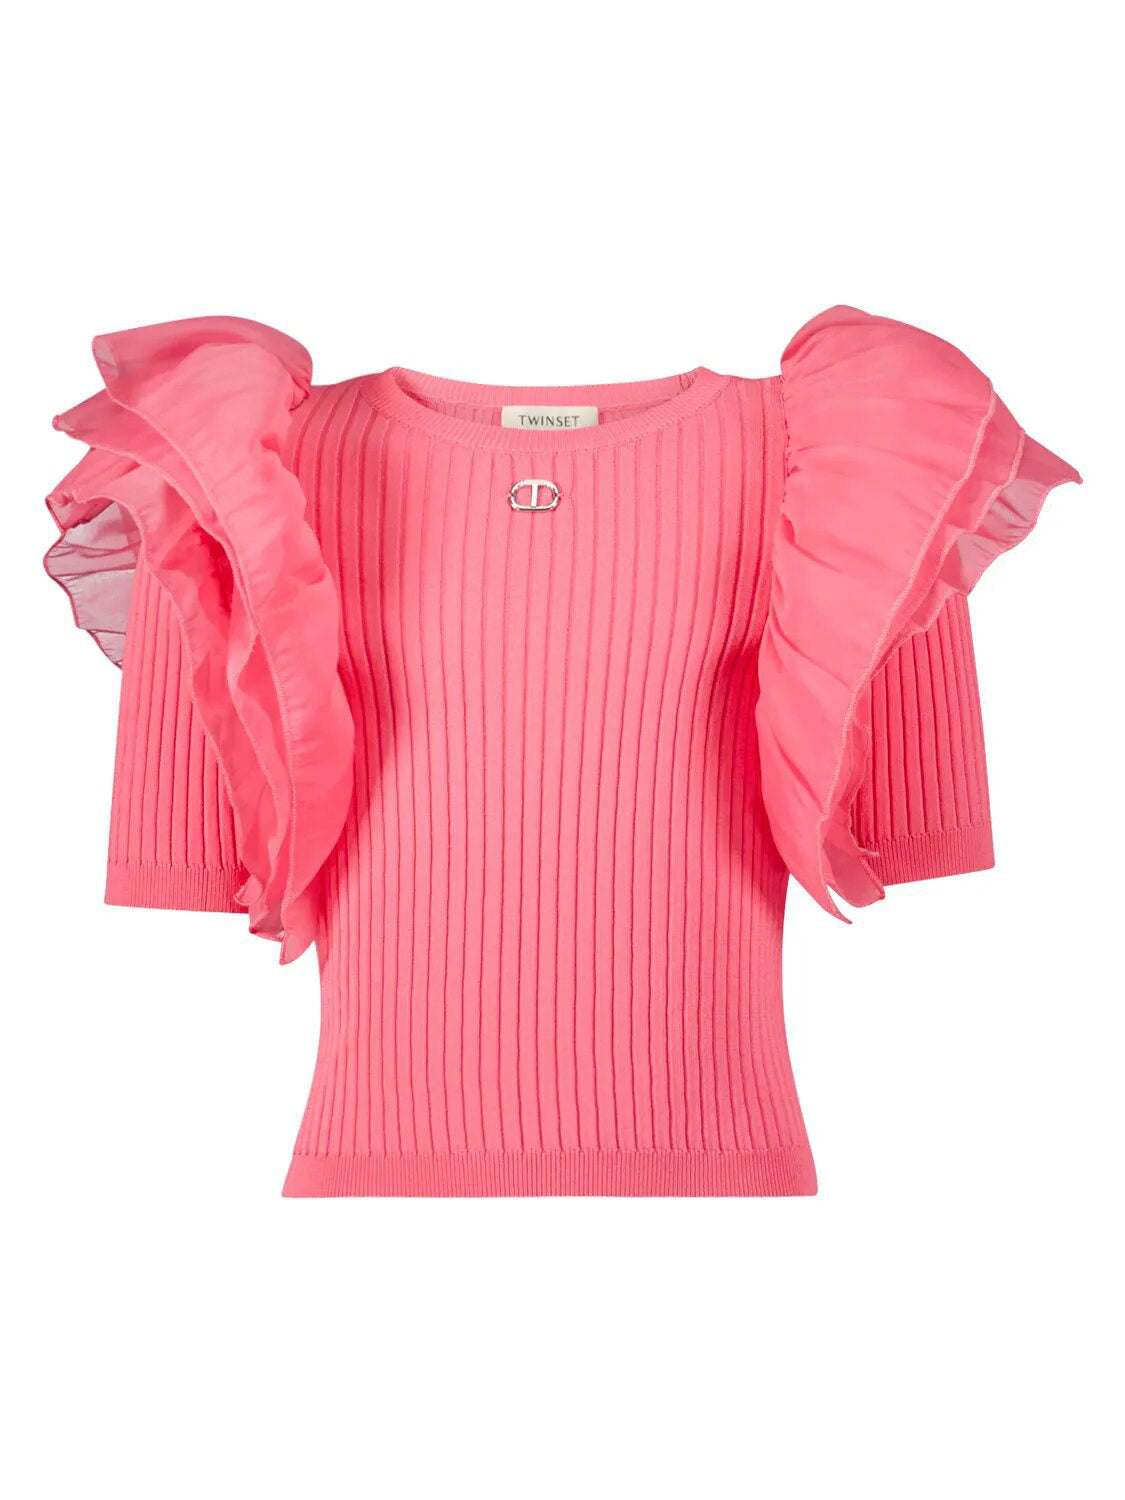 Twinset Girl's viscose top with organza sleeves